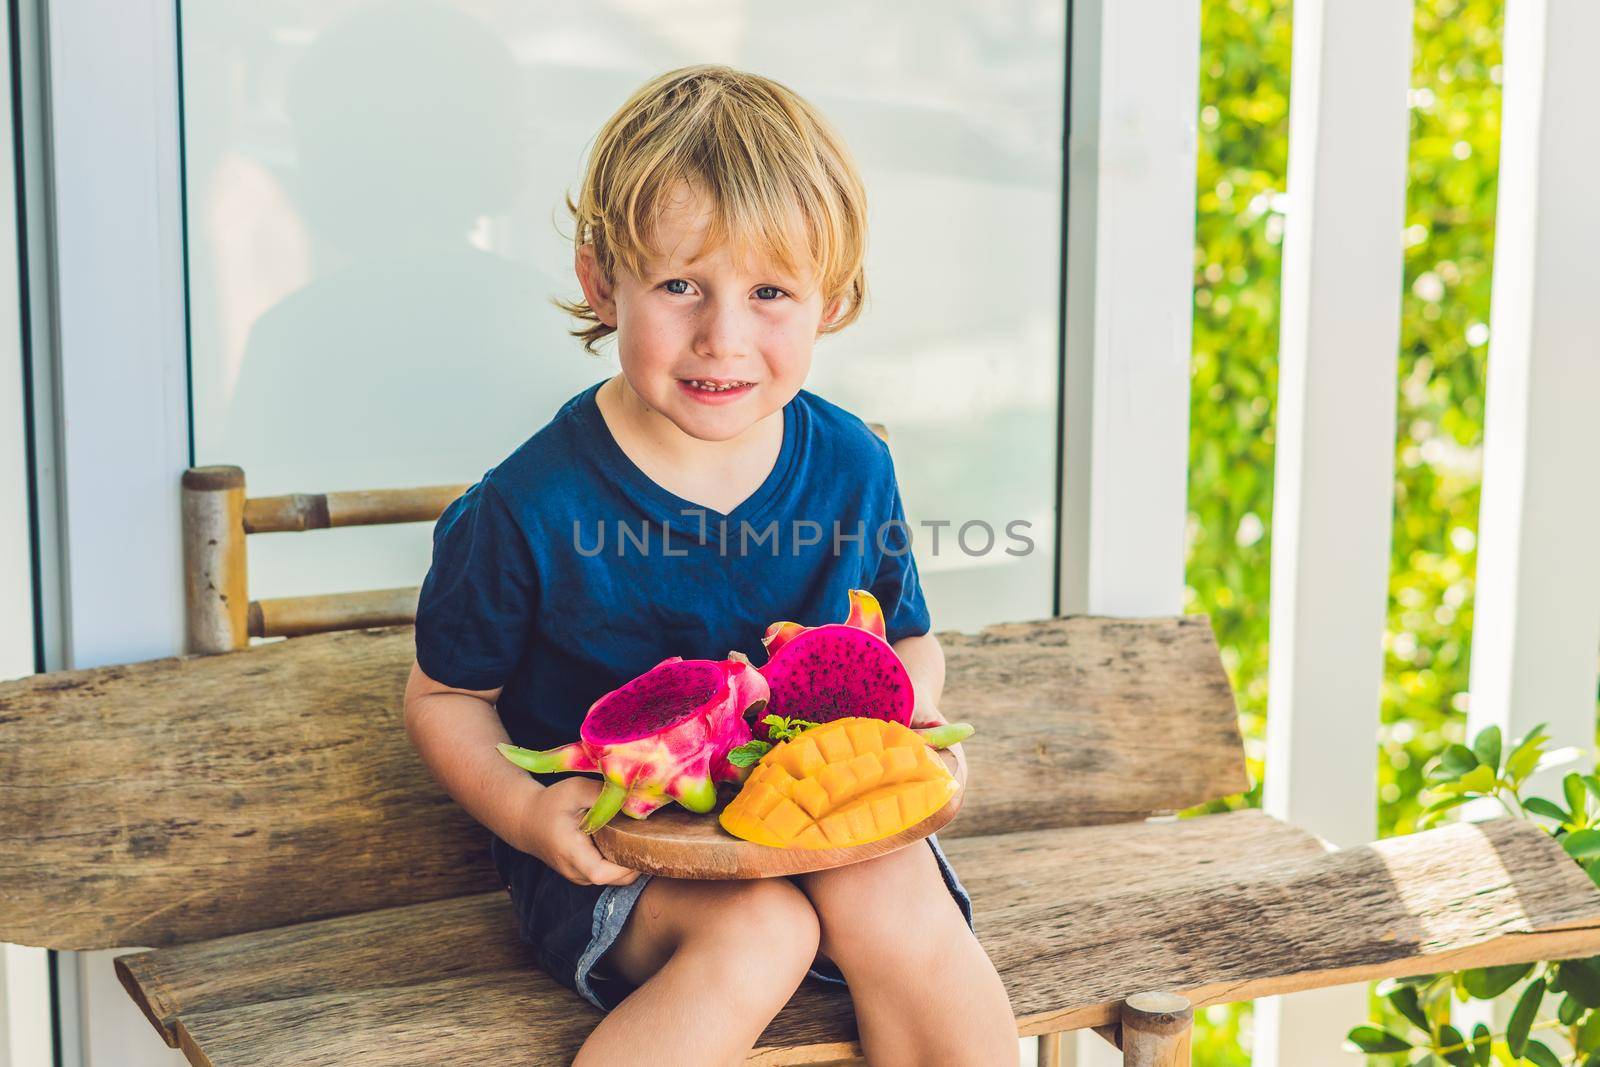 Diced dragon fruit and mango in the hands of the boy by galitskaya